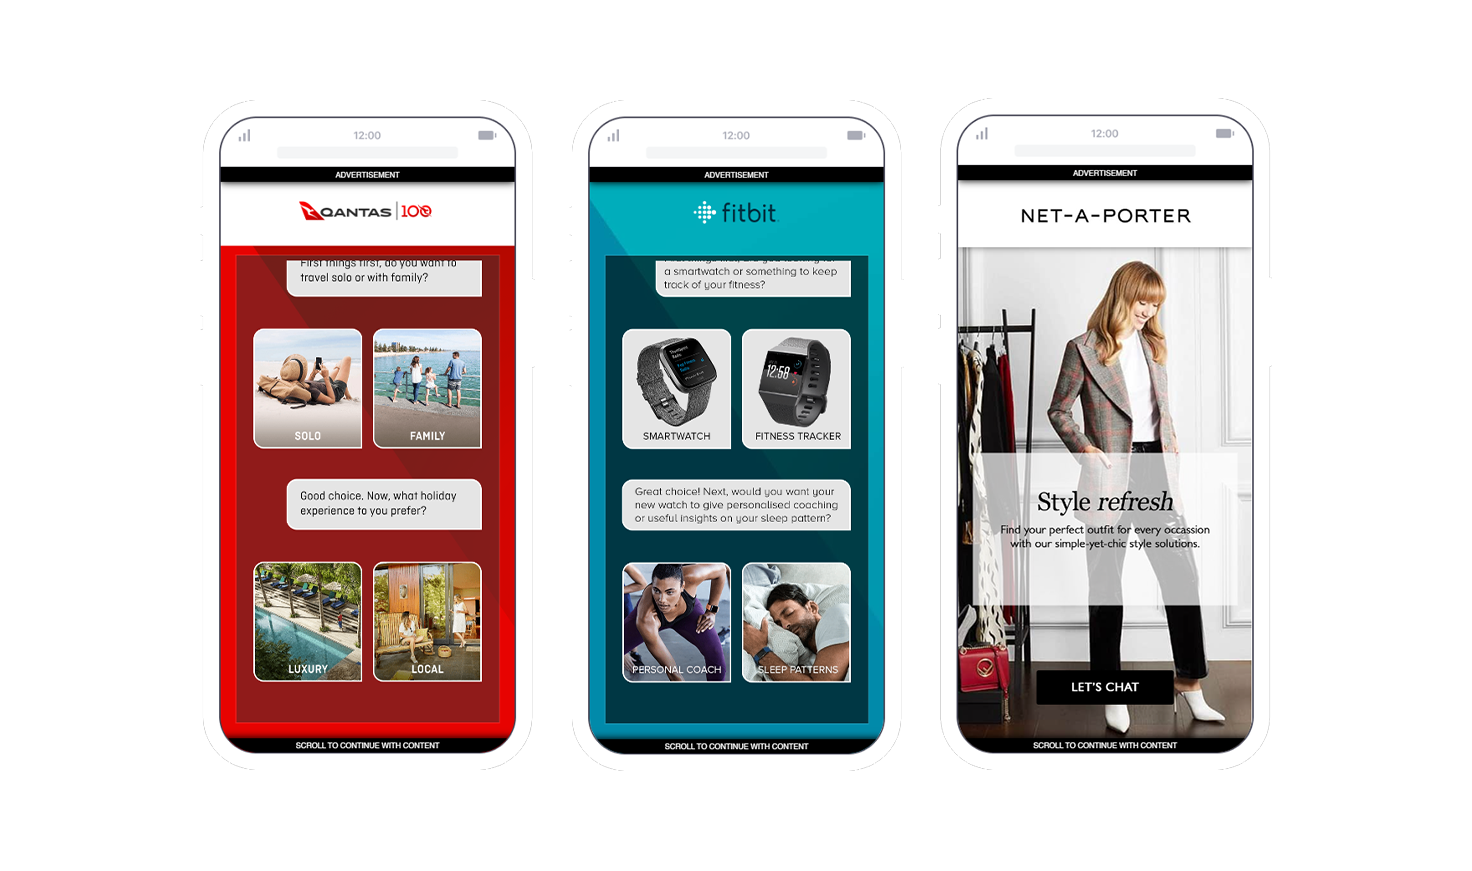 AdTalk, a cutting-edge chatbot interface, enhances online shopping by providing a conversational experience that tailors product recommendations through user interactions.